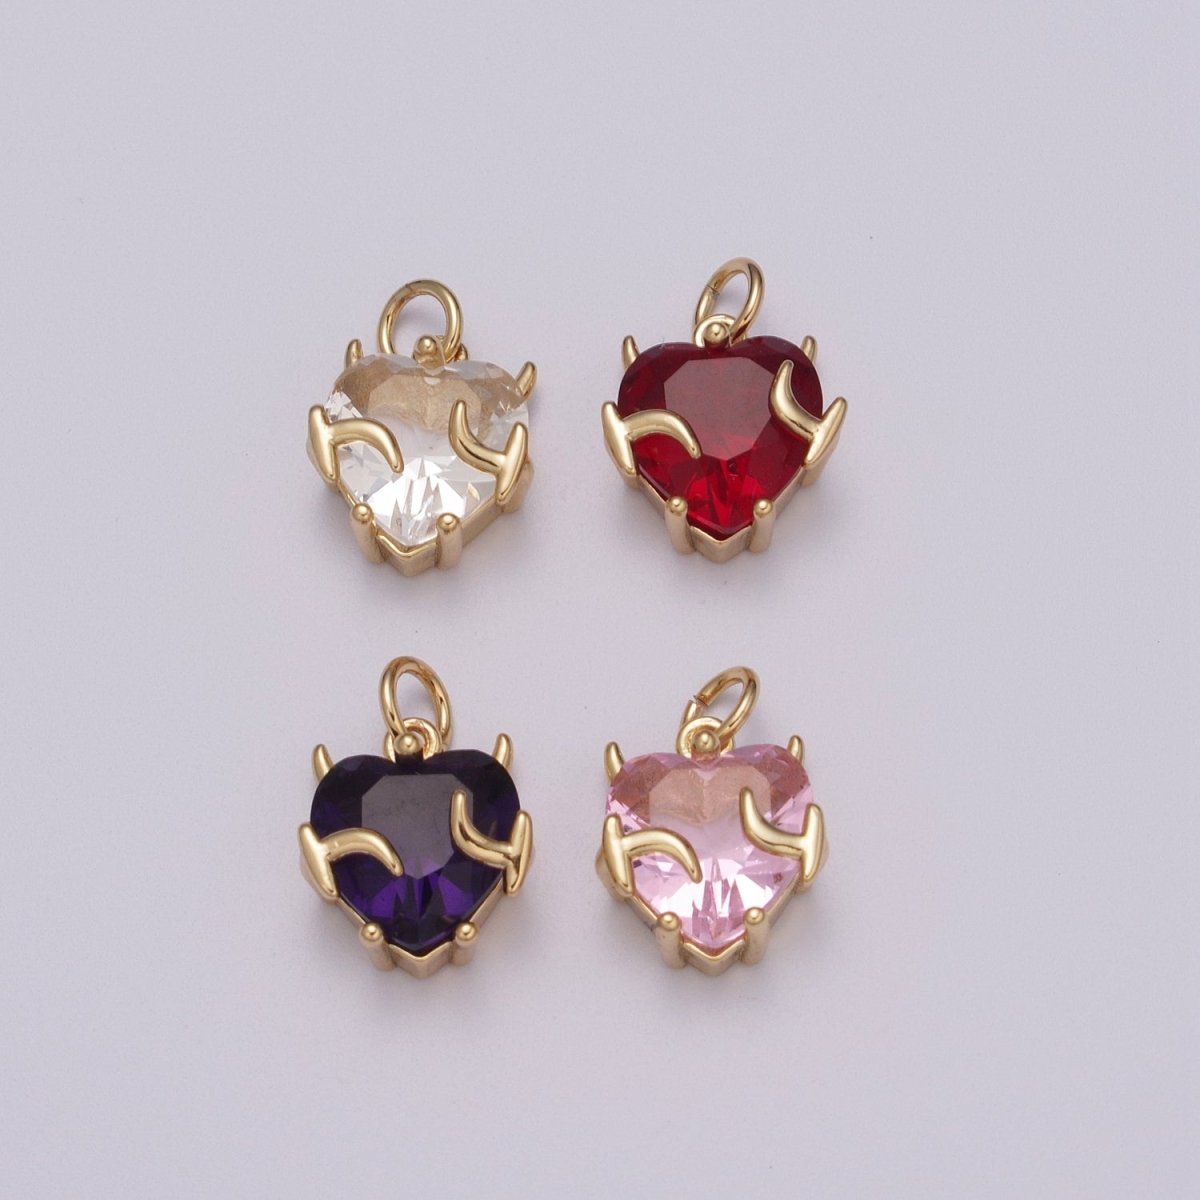 Gold Heart Charm Necklace Pink Purple Clear Red Heart Necklace Bracelet Charm Add on Charm M-774 - M-777 - DLUXCA